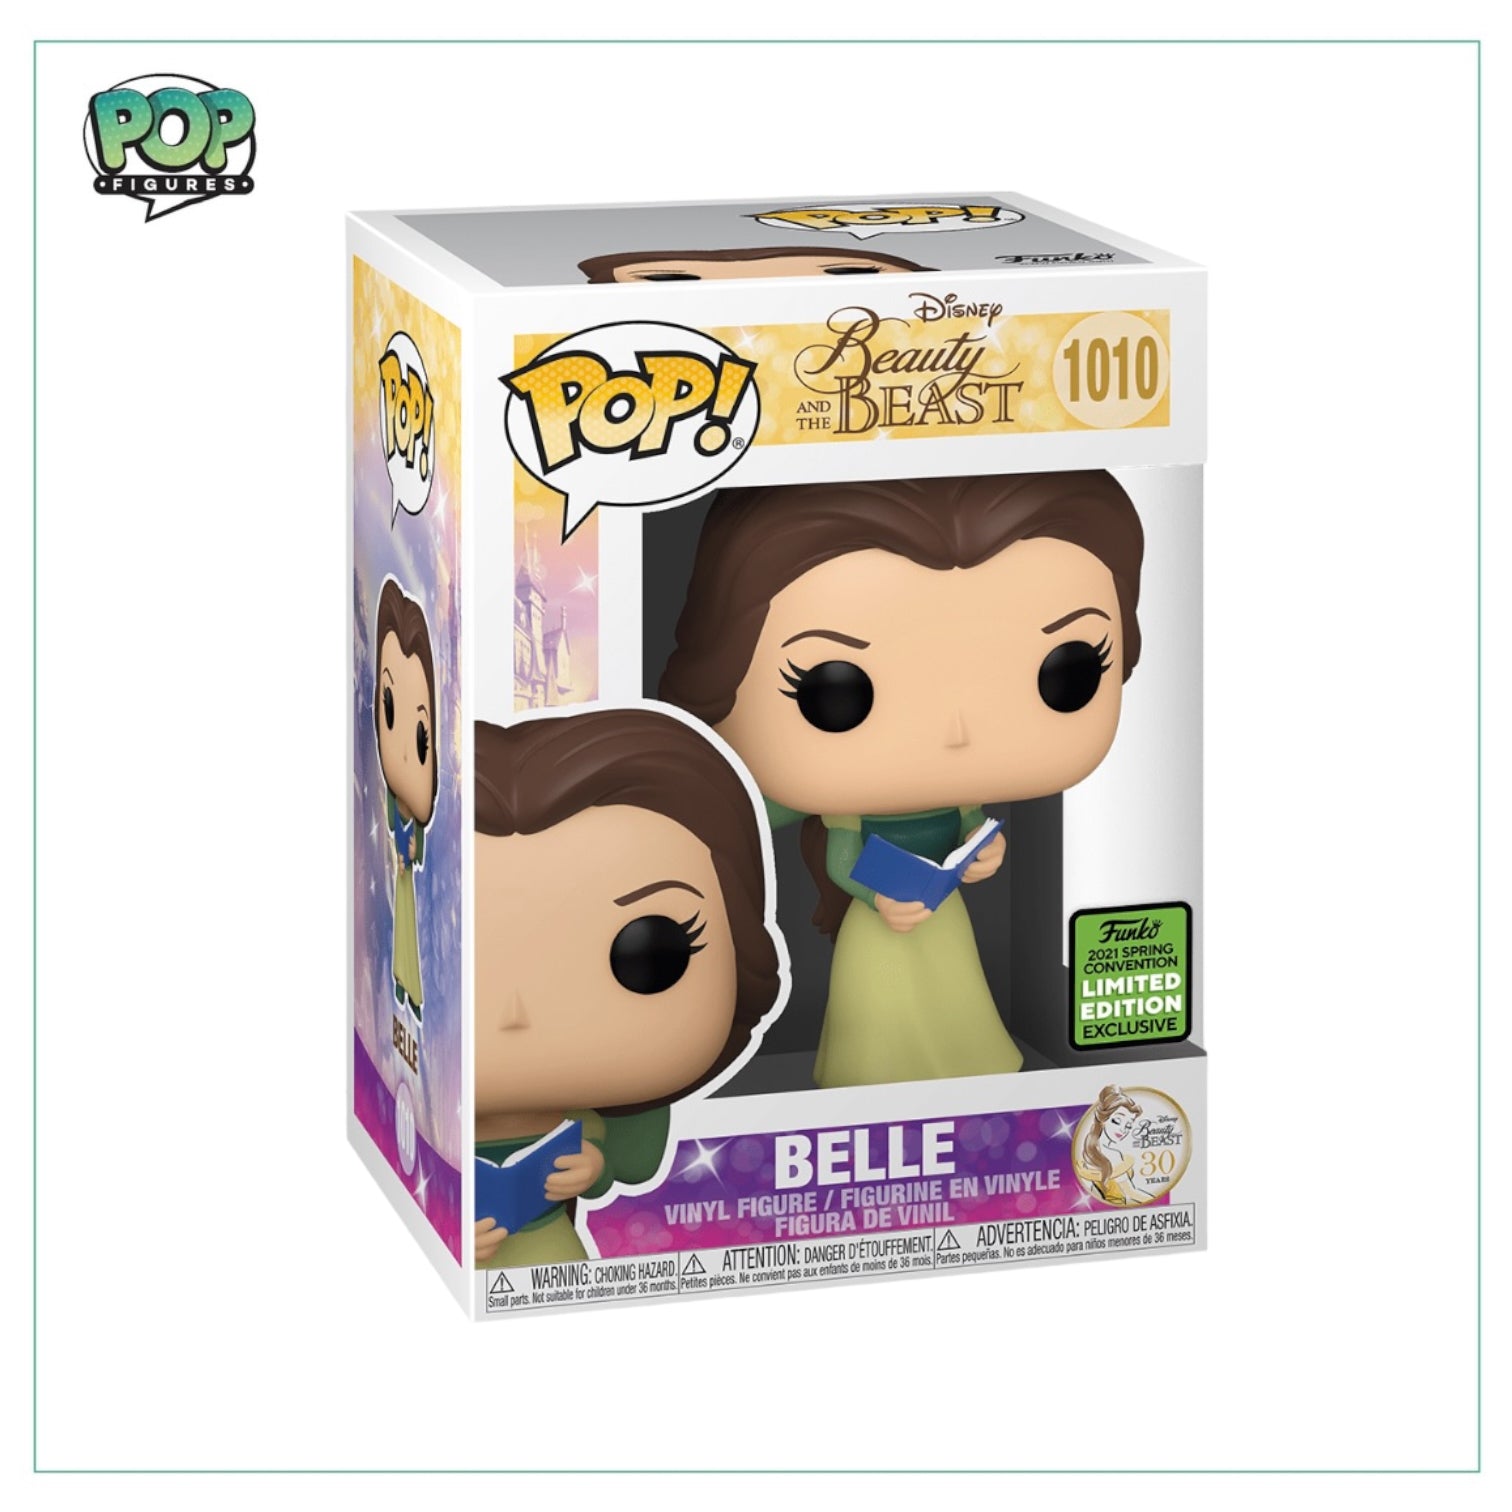 Belle #1010 Funko Pop! - Beauty and The Beast - 2021 ECCC Shared Sticker - Angry Cat